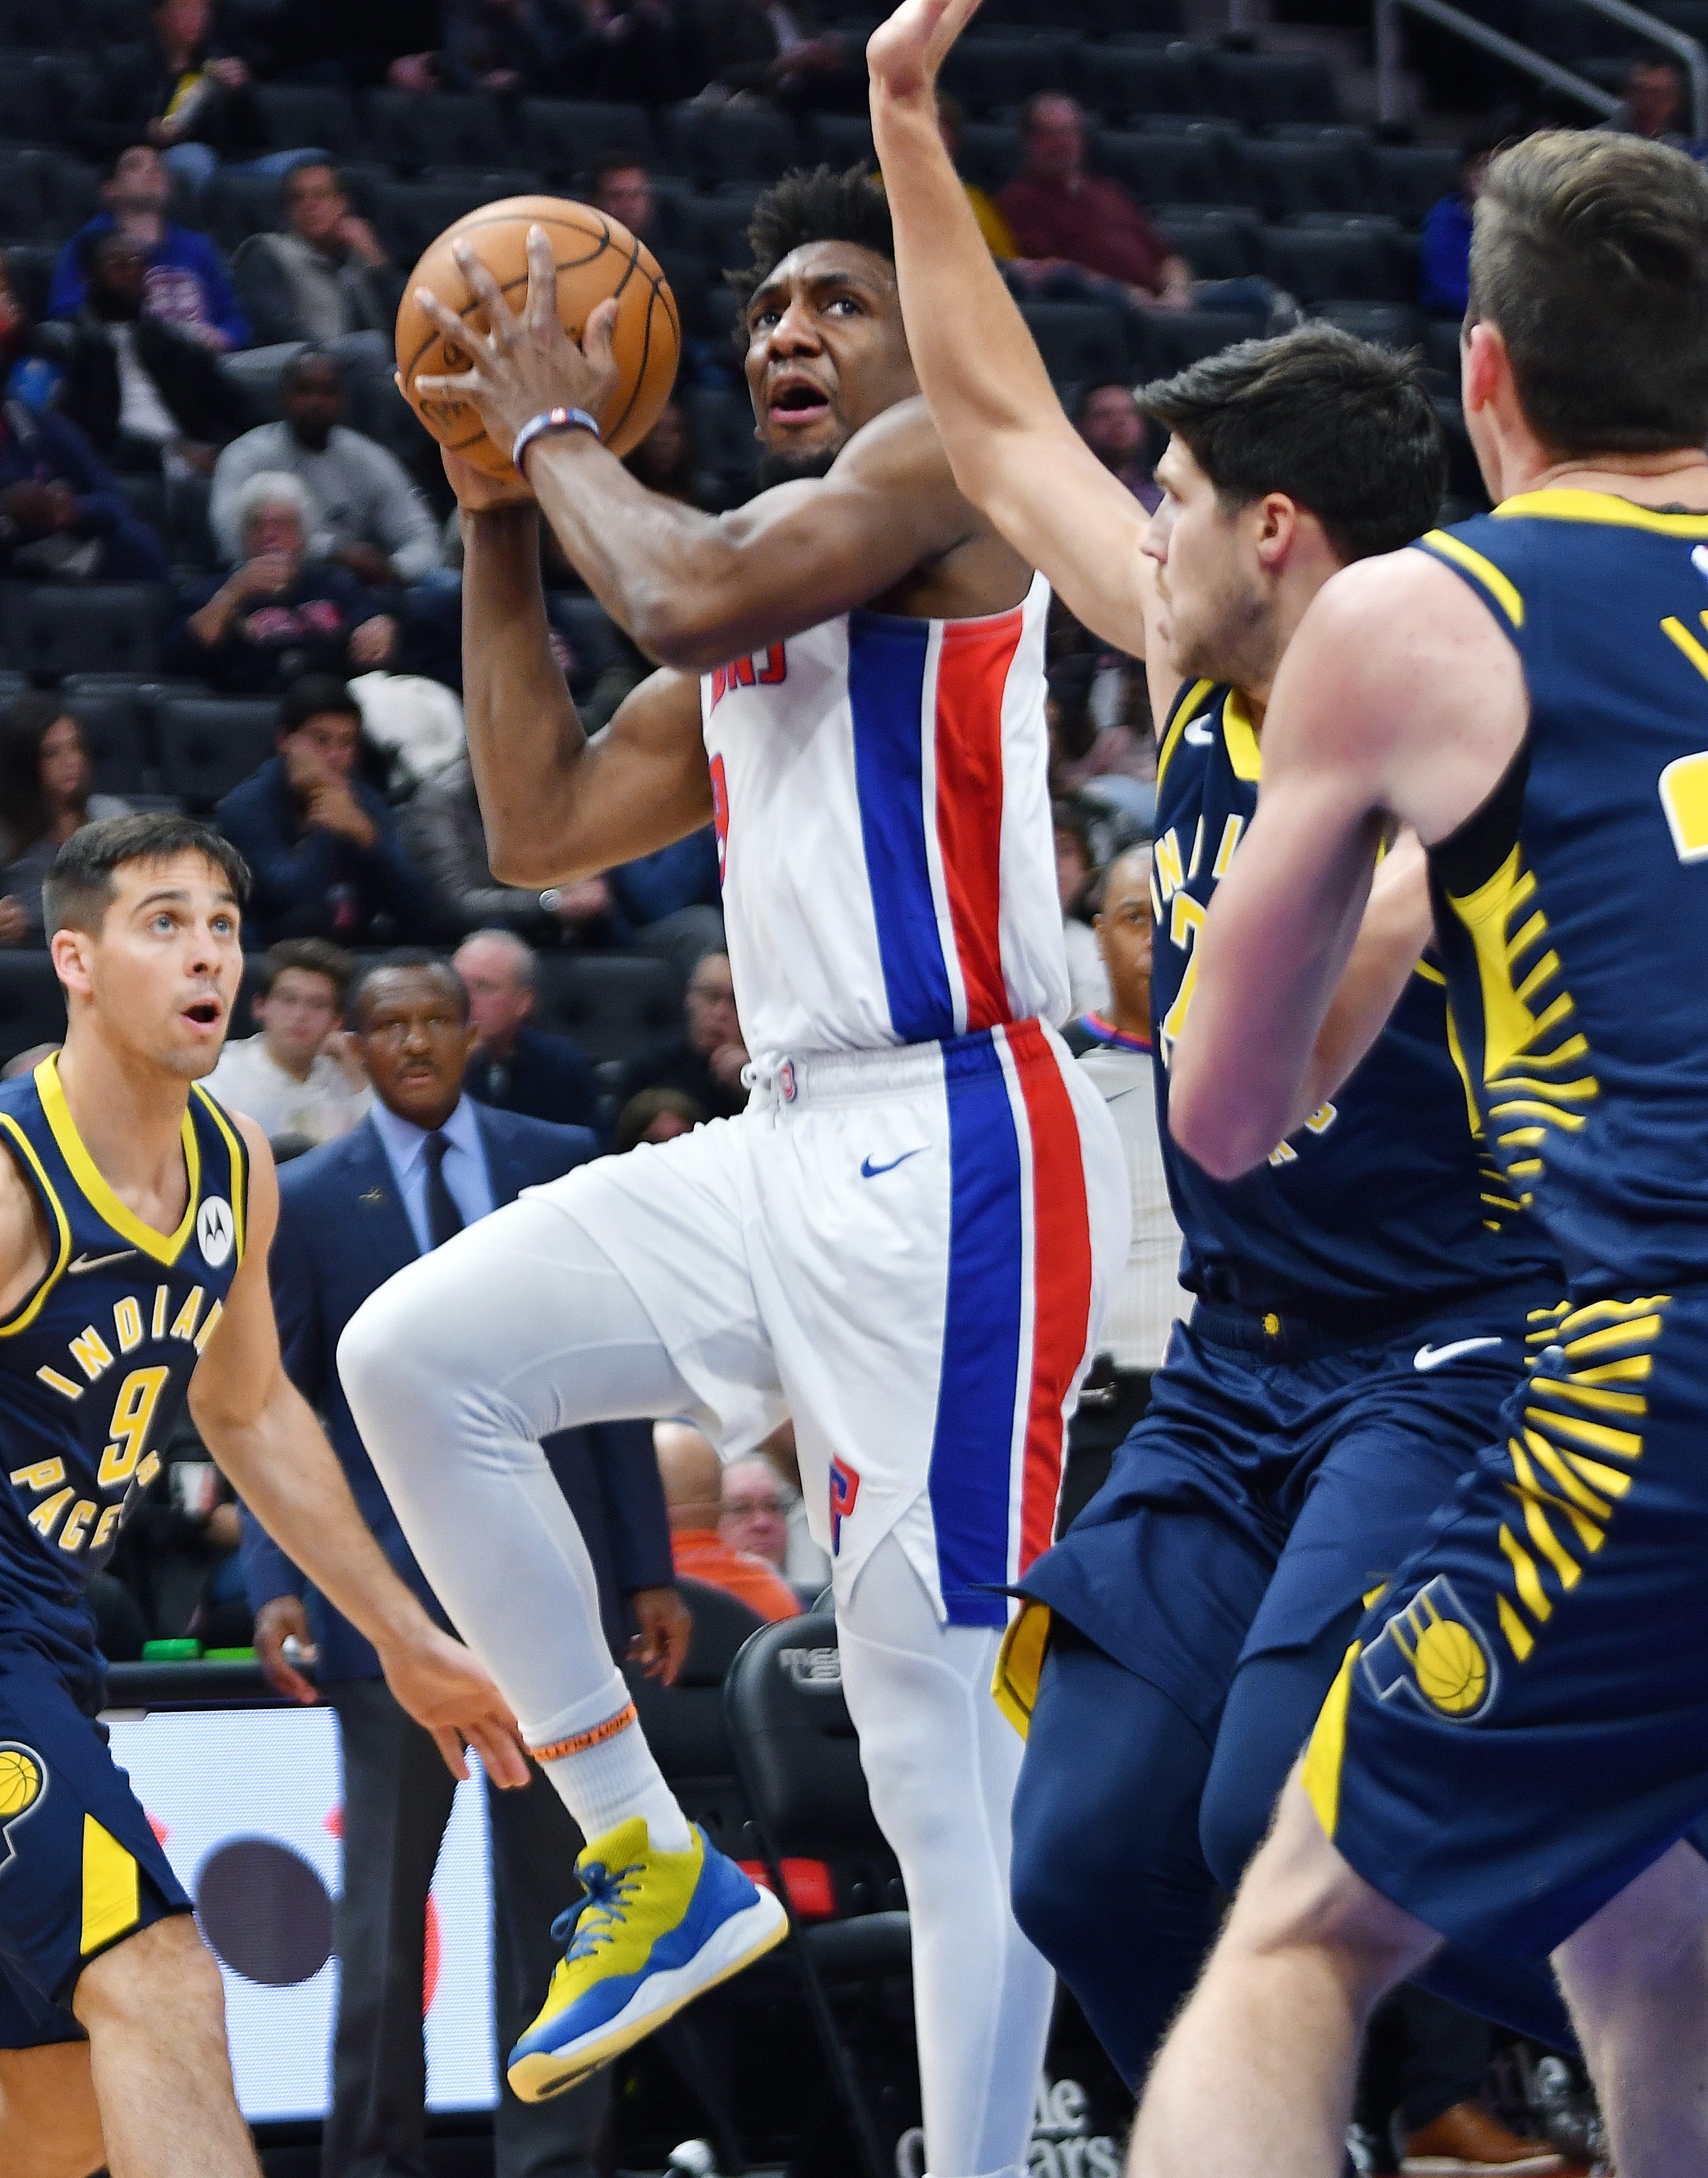 Pistons' Langston Galloway shoots over Pacers' Doug McDermott in the second quarter.